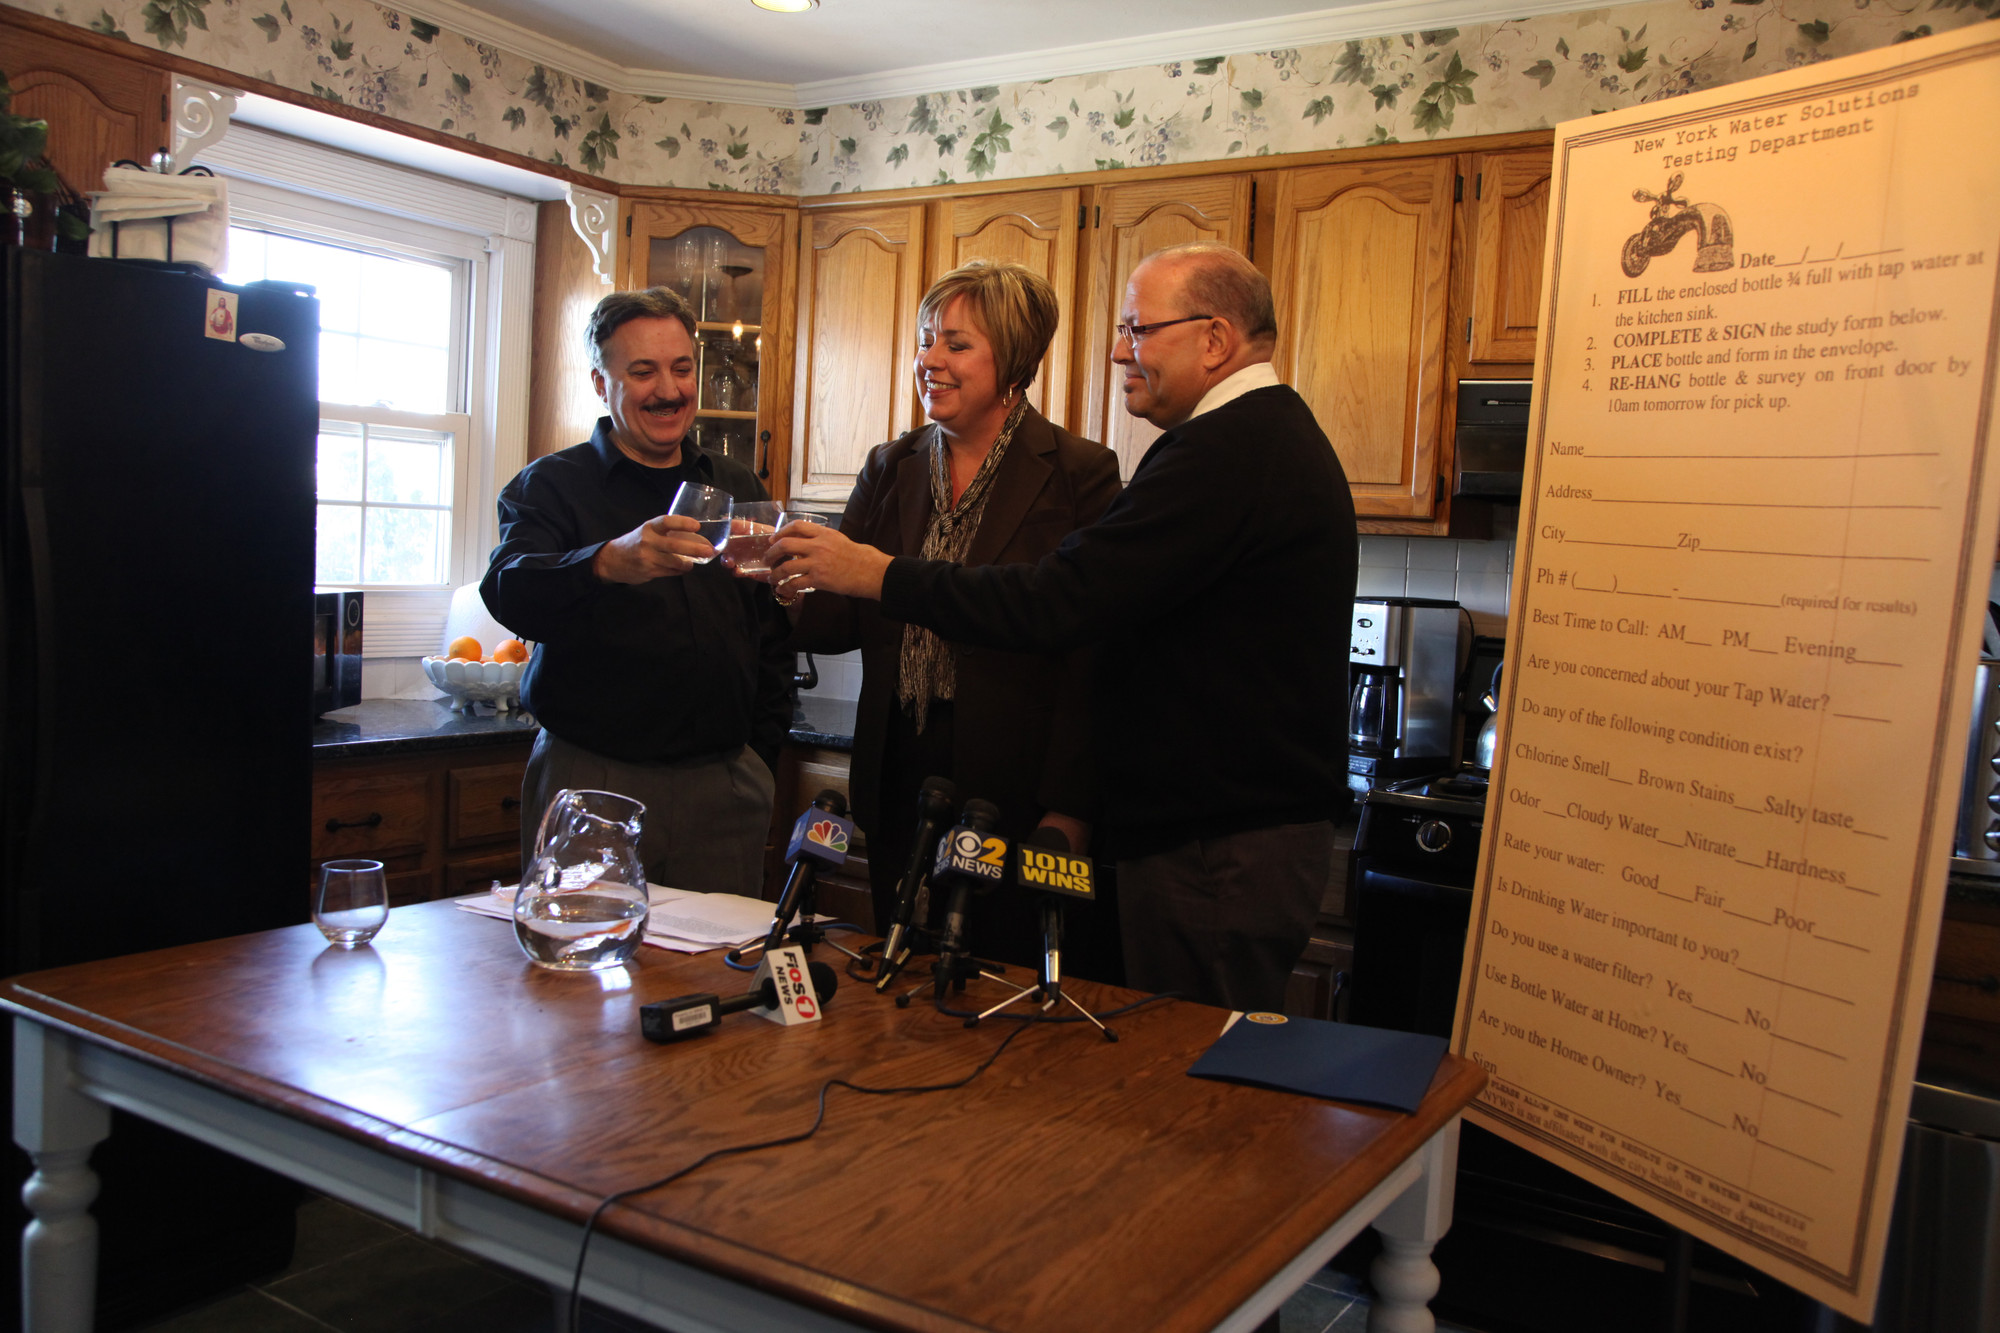 Borrelli’s Italian restaurant owner Frank Borrelli, left, had a water toast inside his home with Town of Hempstead Supervisor Kate Murray and Councilman Gary Hudes to signify that the town’s drinking water is safe.